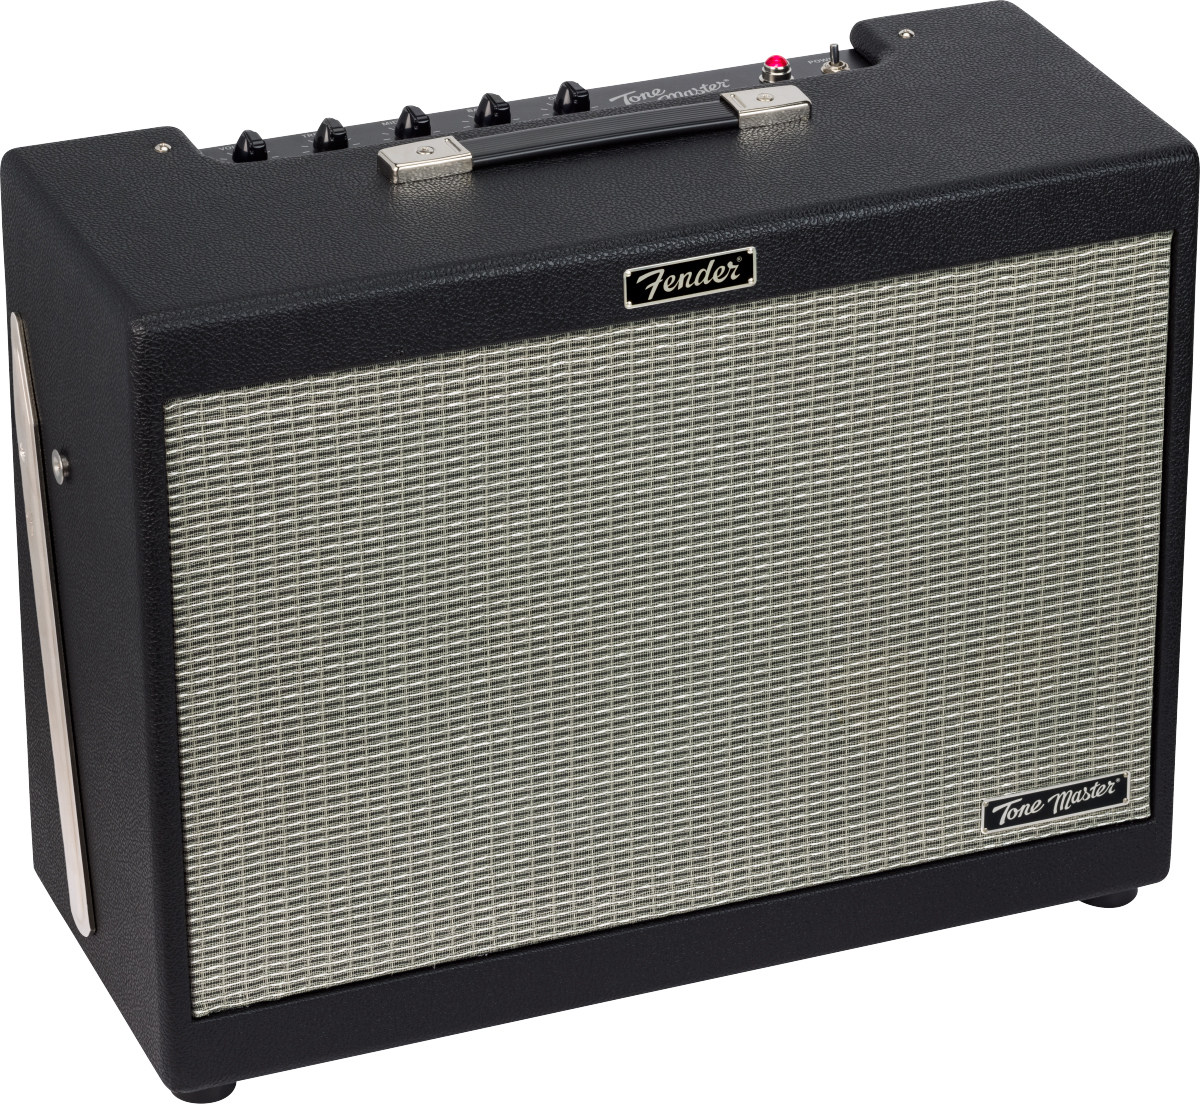 Fender Tone Master Fr-12 Powered Speaker Cab 1x12 1000w - Electric guitar combo amp - Main picture